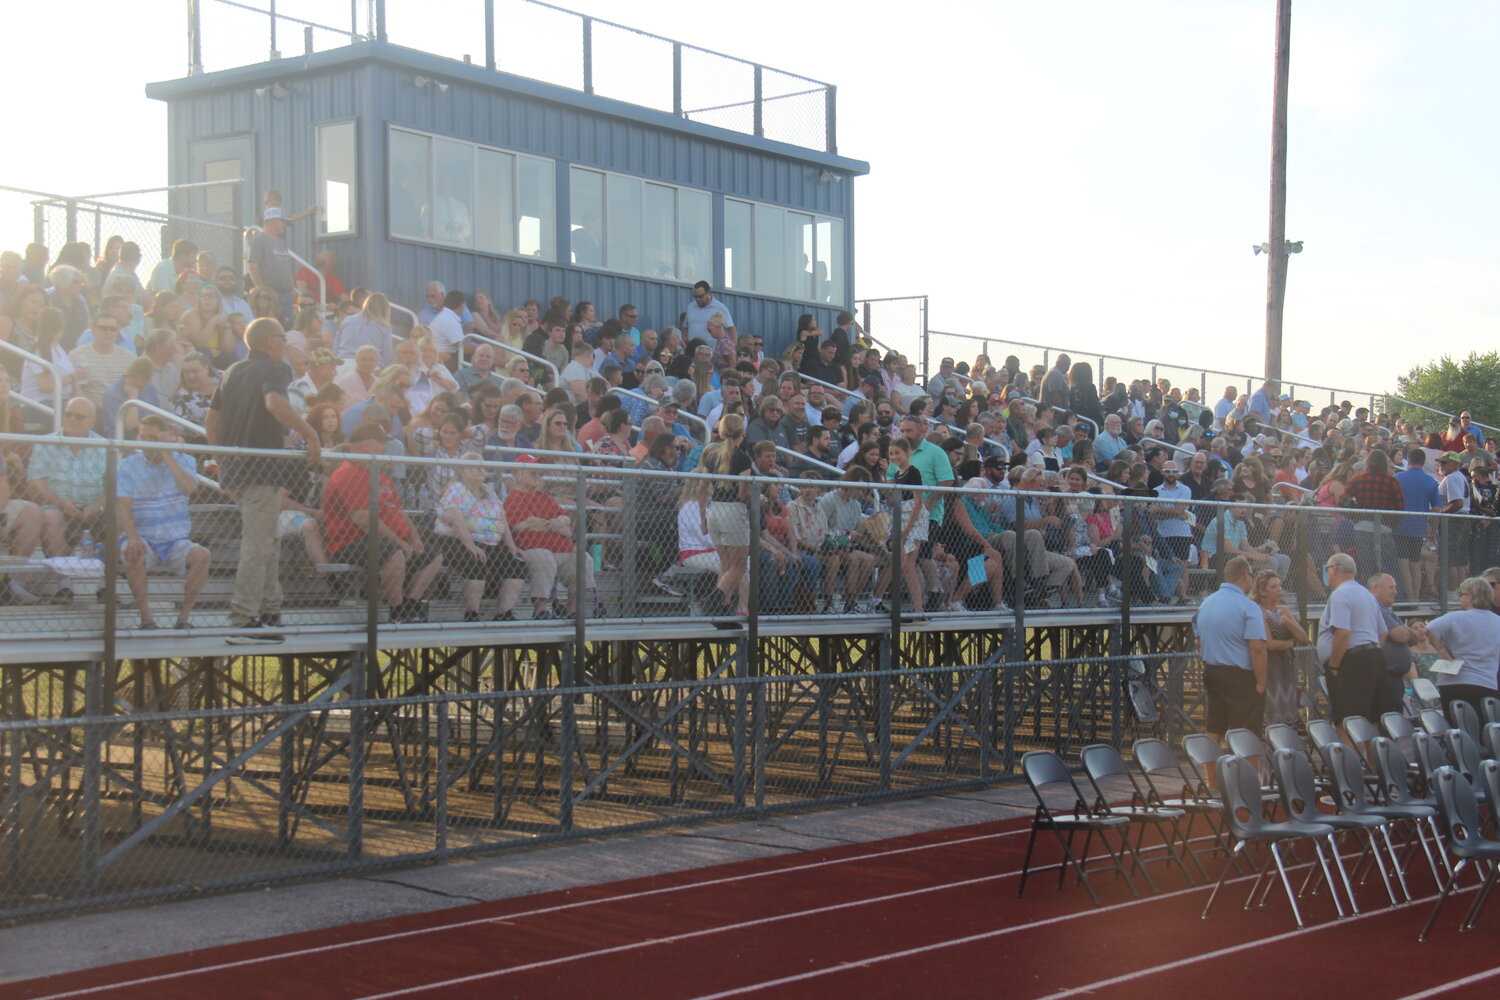 The football bleachers were packed full of excited family members and friends as they wait for the Wright City High School graduation ceremony to begin.